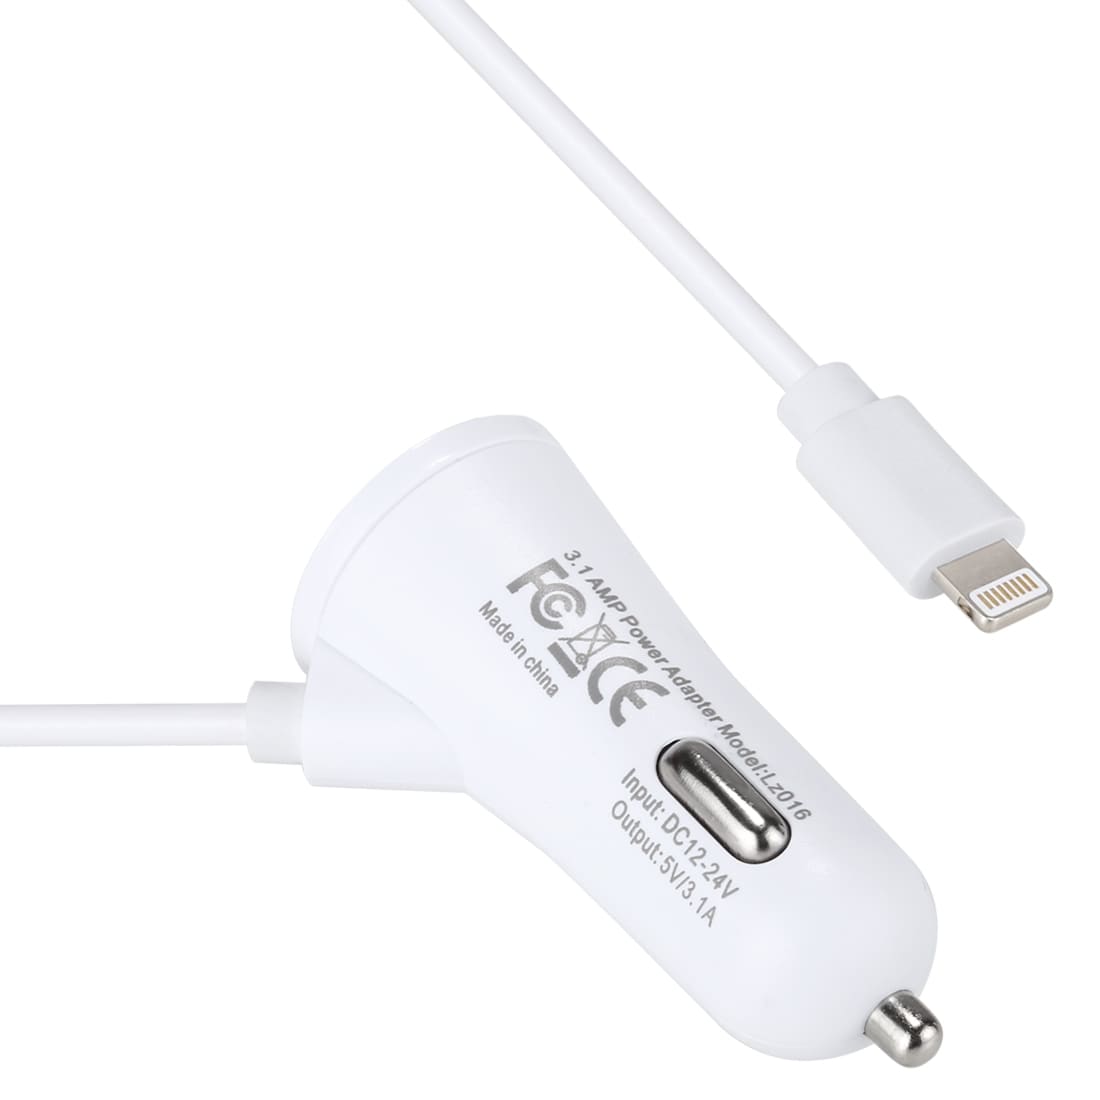 iPhone autolader 3.1A + 2st USB laadcontact